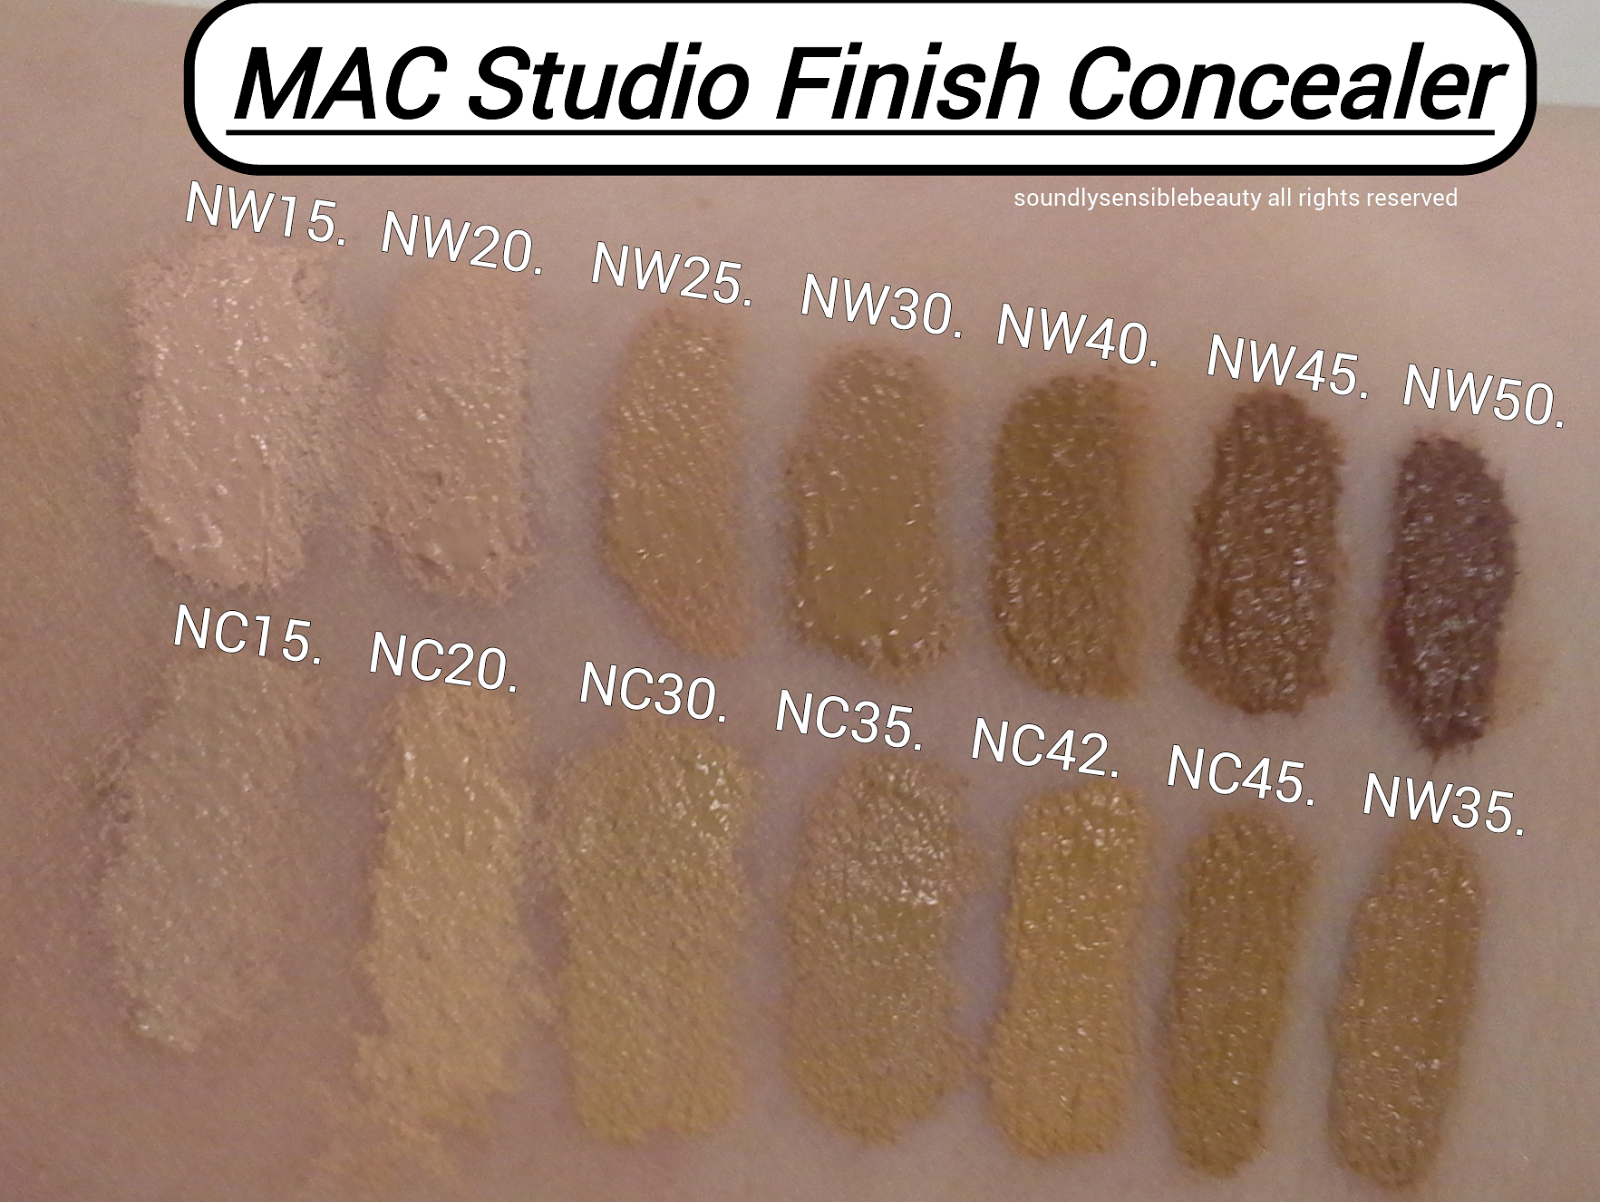 MAC Studio Finish Concealer; Review & Swatches of Shades